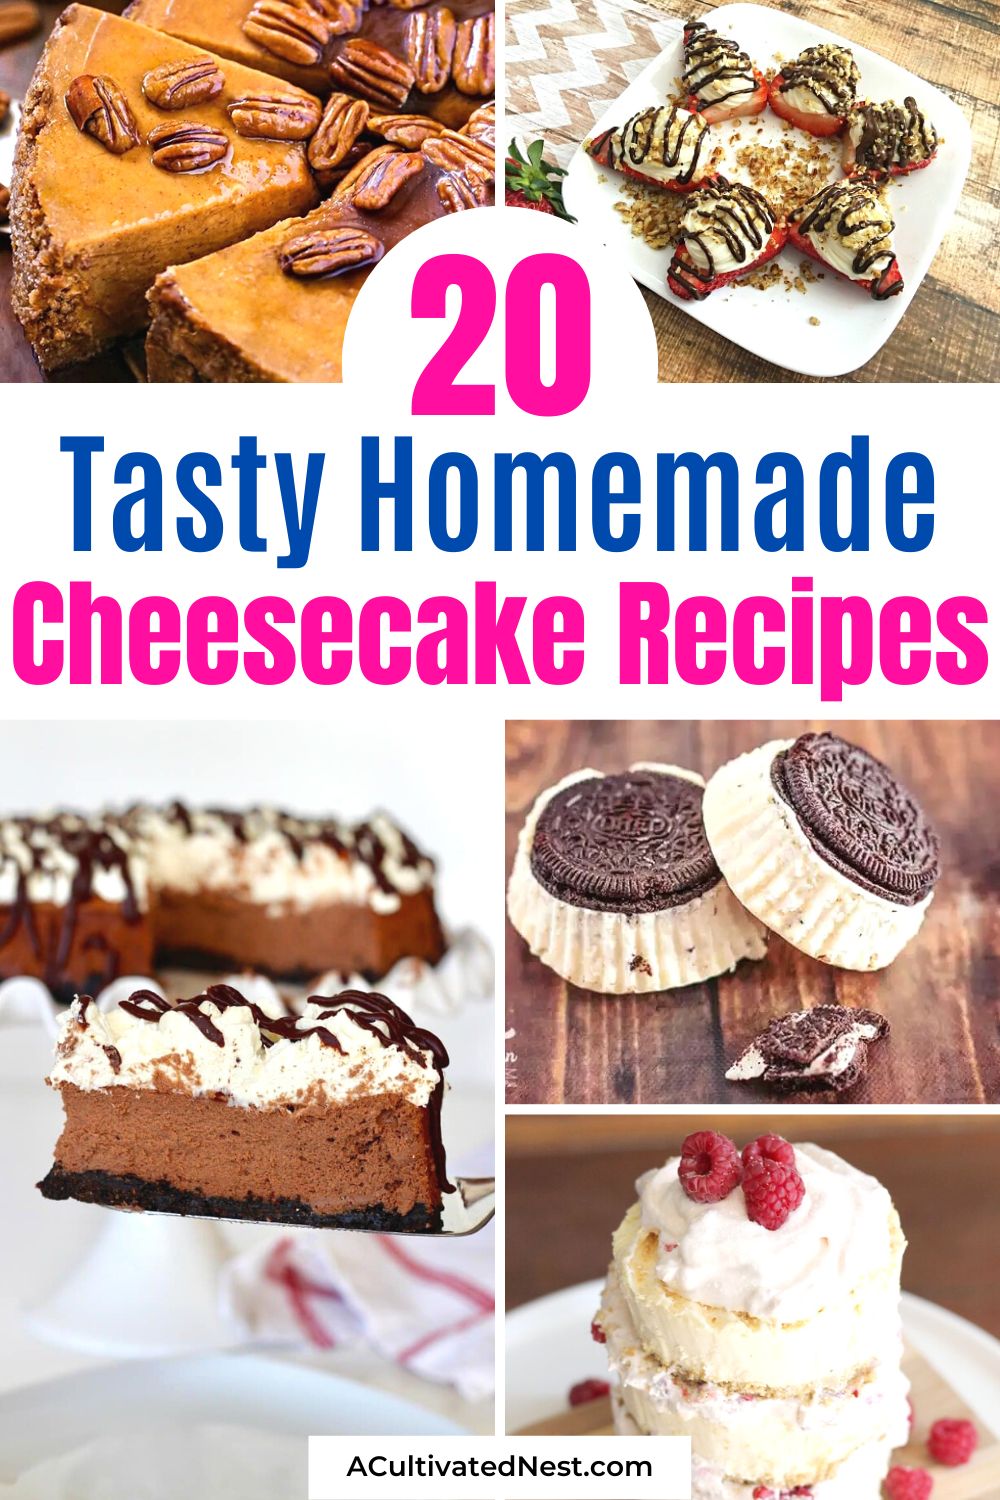 20 Tasty Cheesecake Recipes- Love cheesecake? Then you'll love this variety of delicious and flavorful cheesecake recipes that are both traditional and non-traditional! | homemade dessert recipes, how to make cheesecake from scratch, #cheesecakeRecipes #desserts #dessertRecipes #recipeIdeas #ACultivatedNest